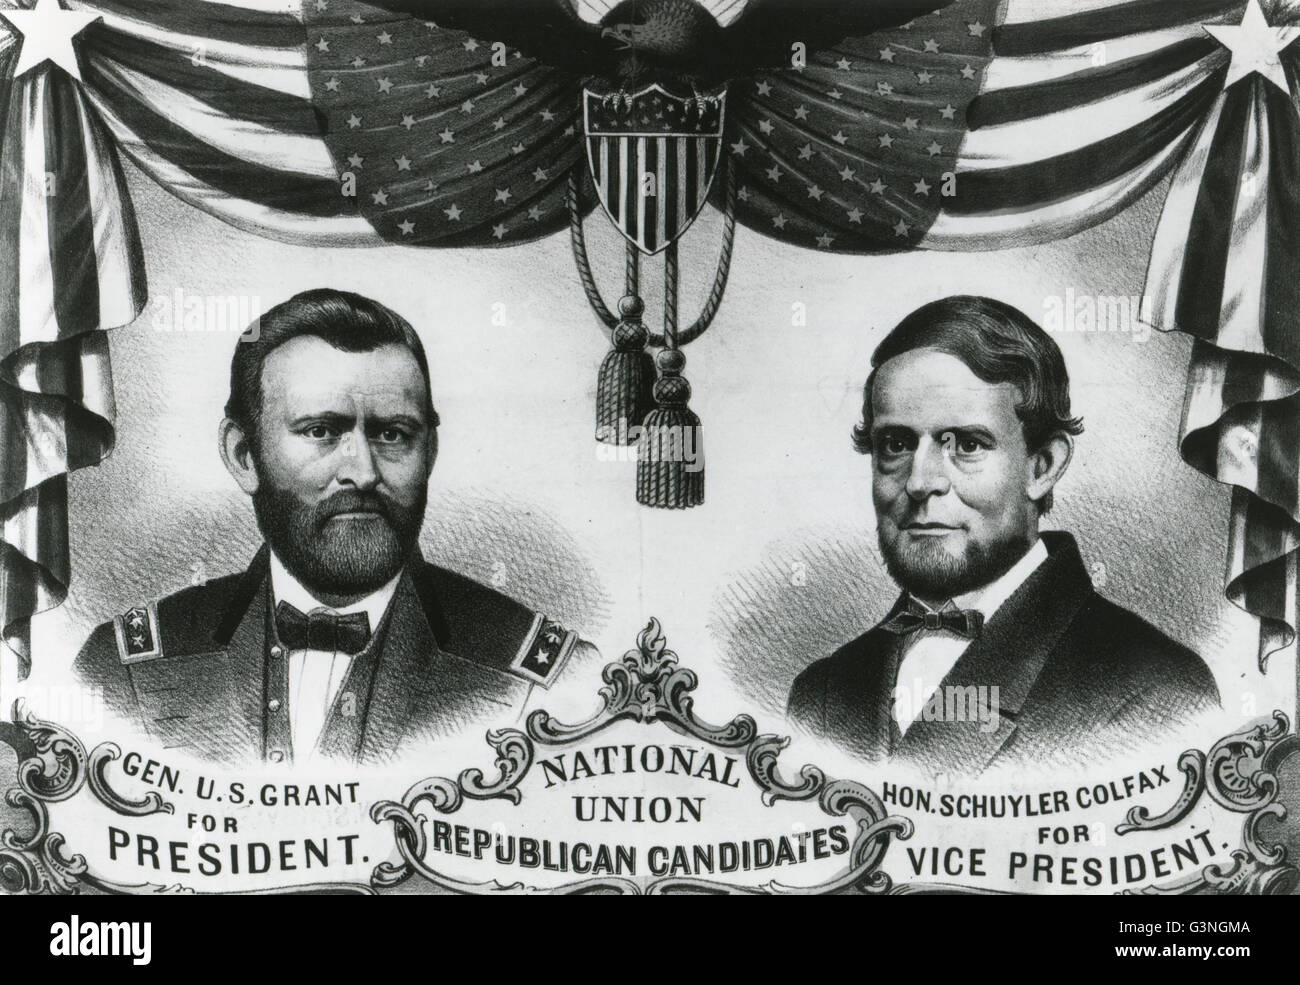 Republican campaign Poster for Presidential Race of 1868 with Gen U.S. Grant for President and Schuyler Colfax for Vice President. Stock Photo